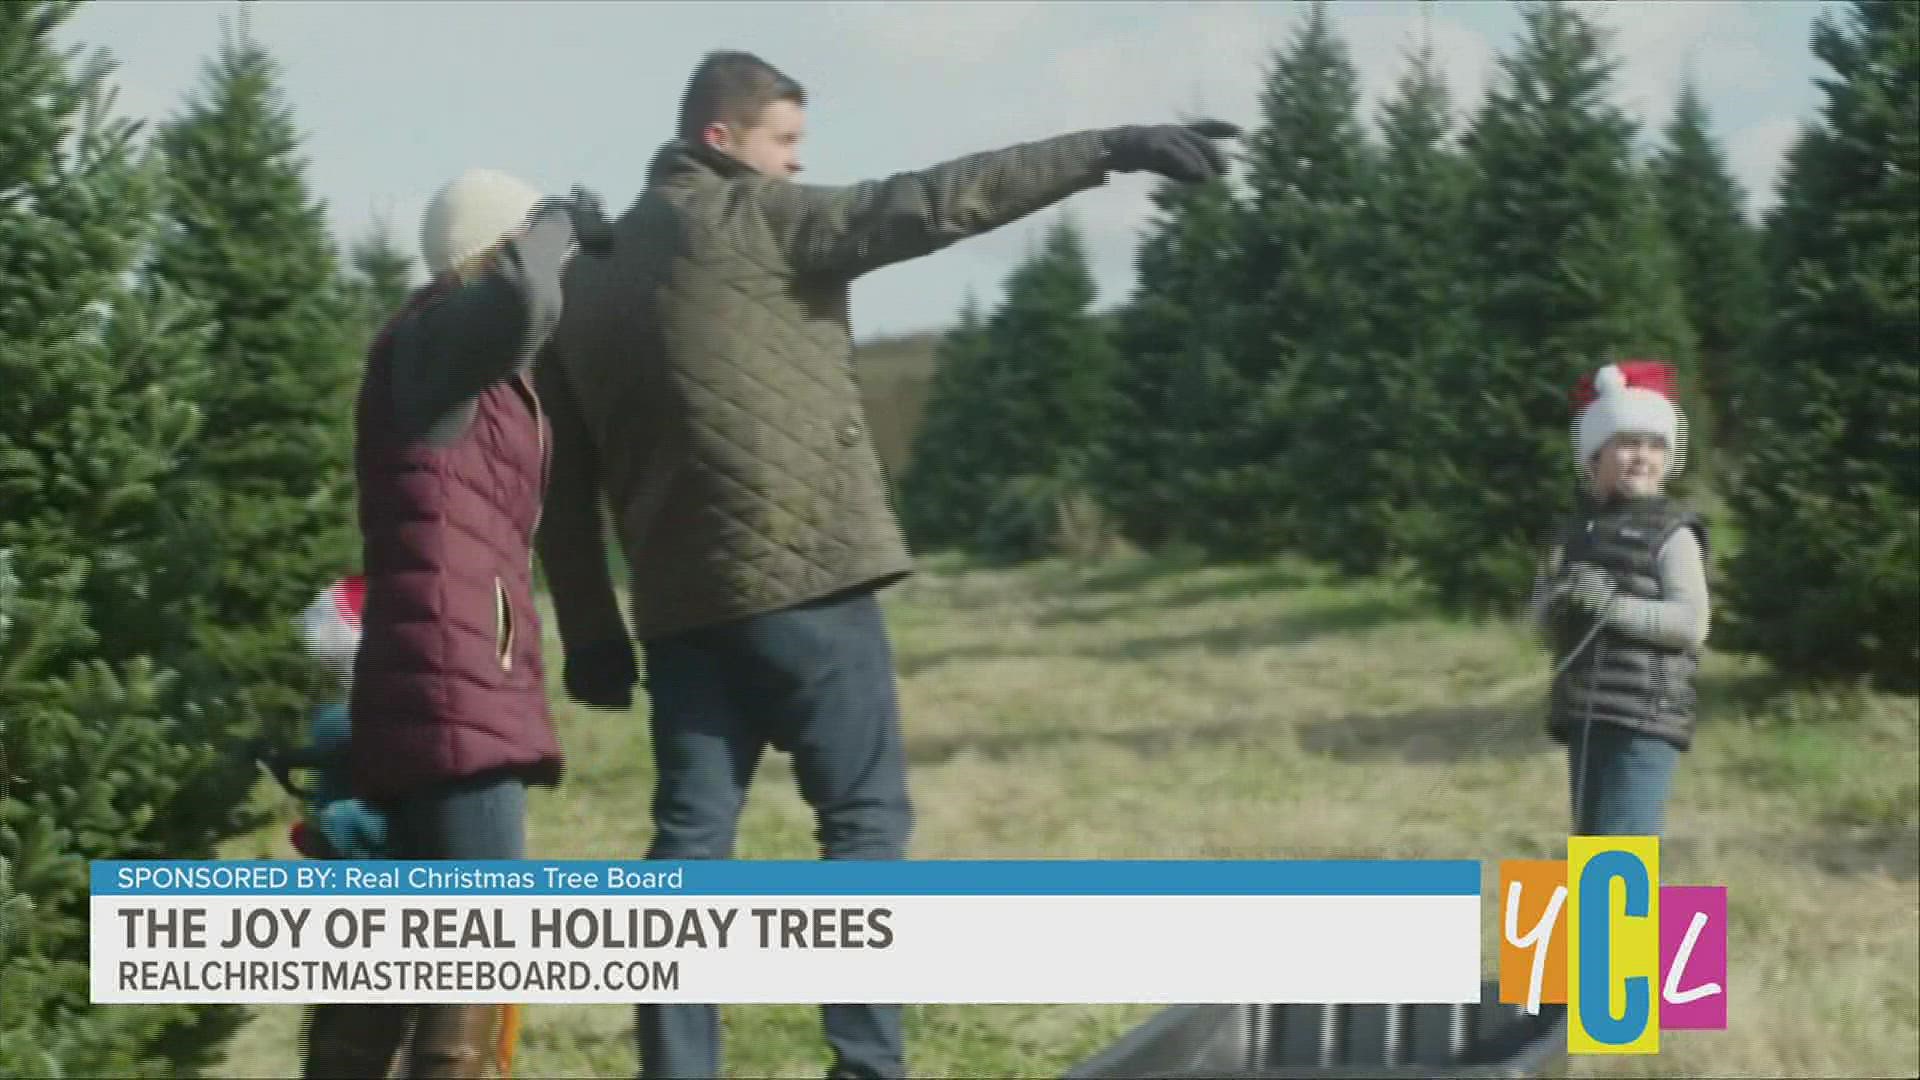 Learn about the surprising facts of real pine trees and the significance they have to people in the U.S. This segment is paid by Real Christmas Tree Board.